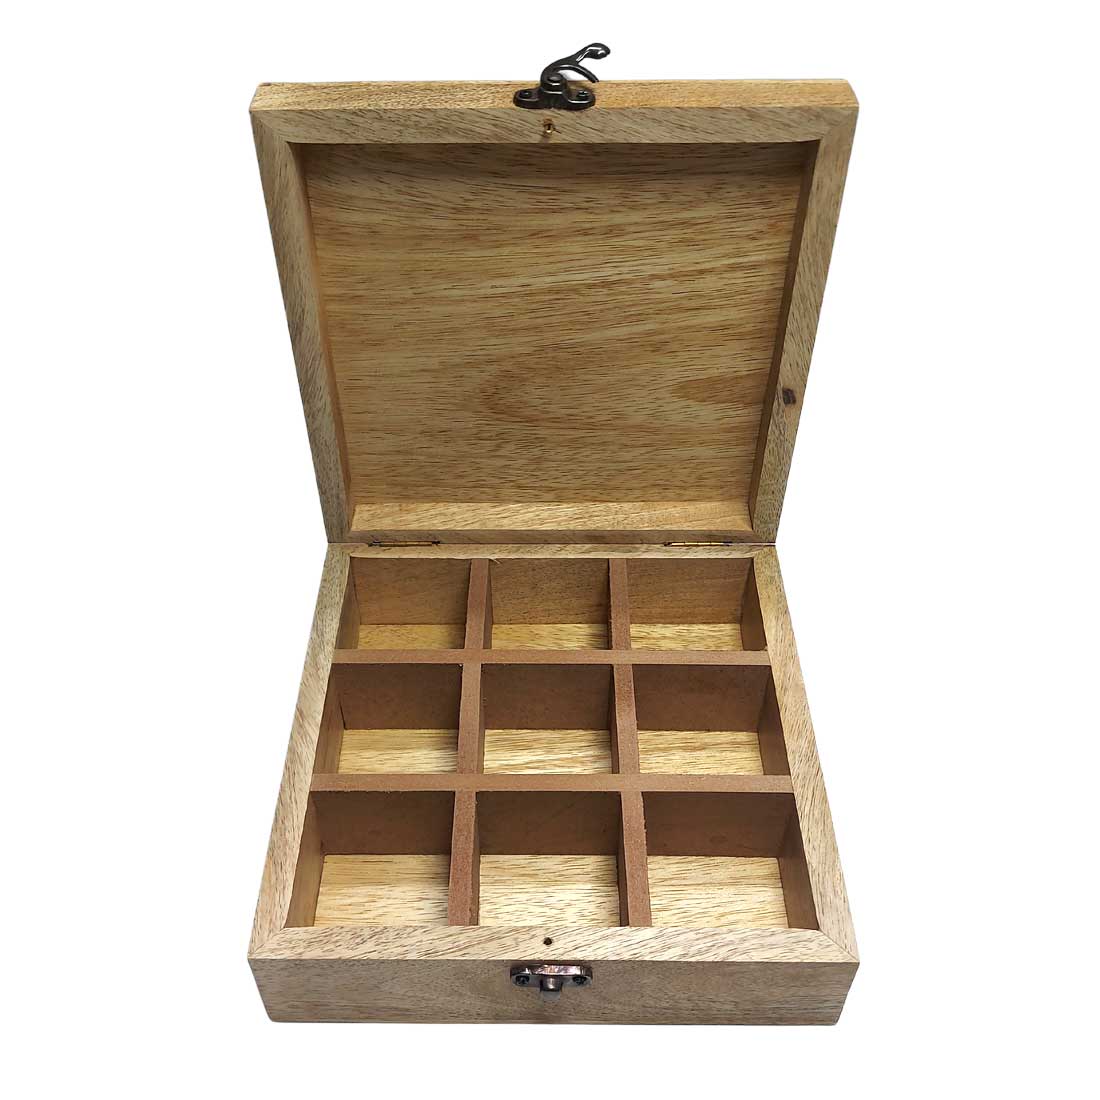 Personalized Wooden Jewelry Box With Engraving - Add Text